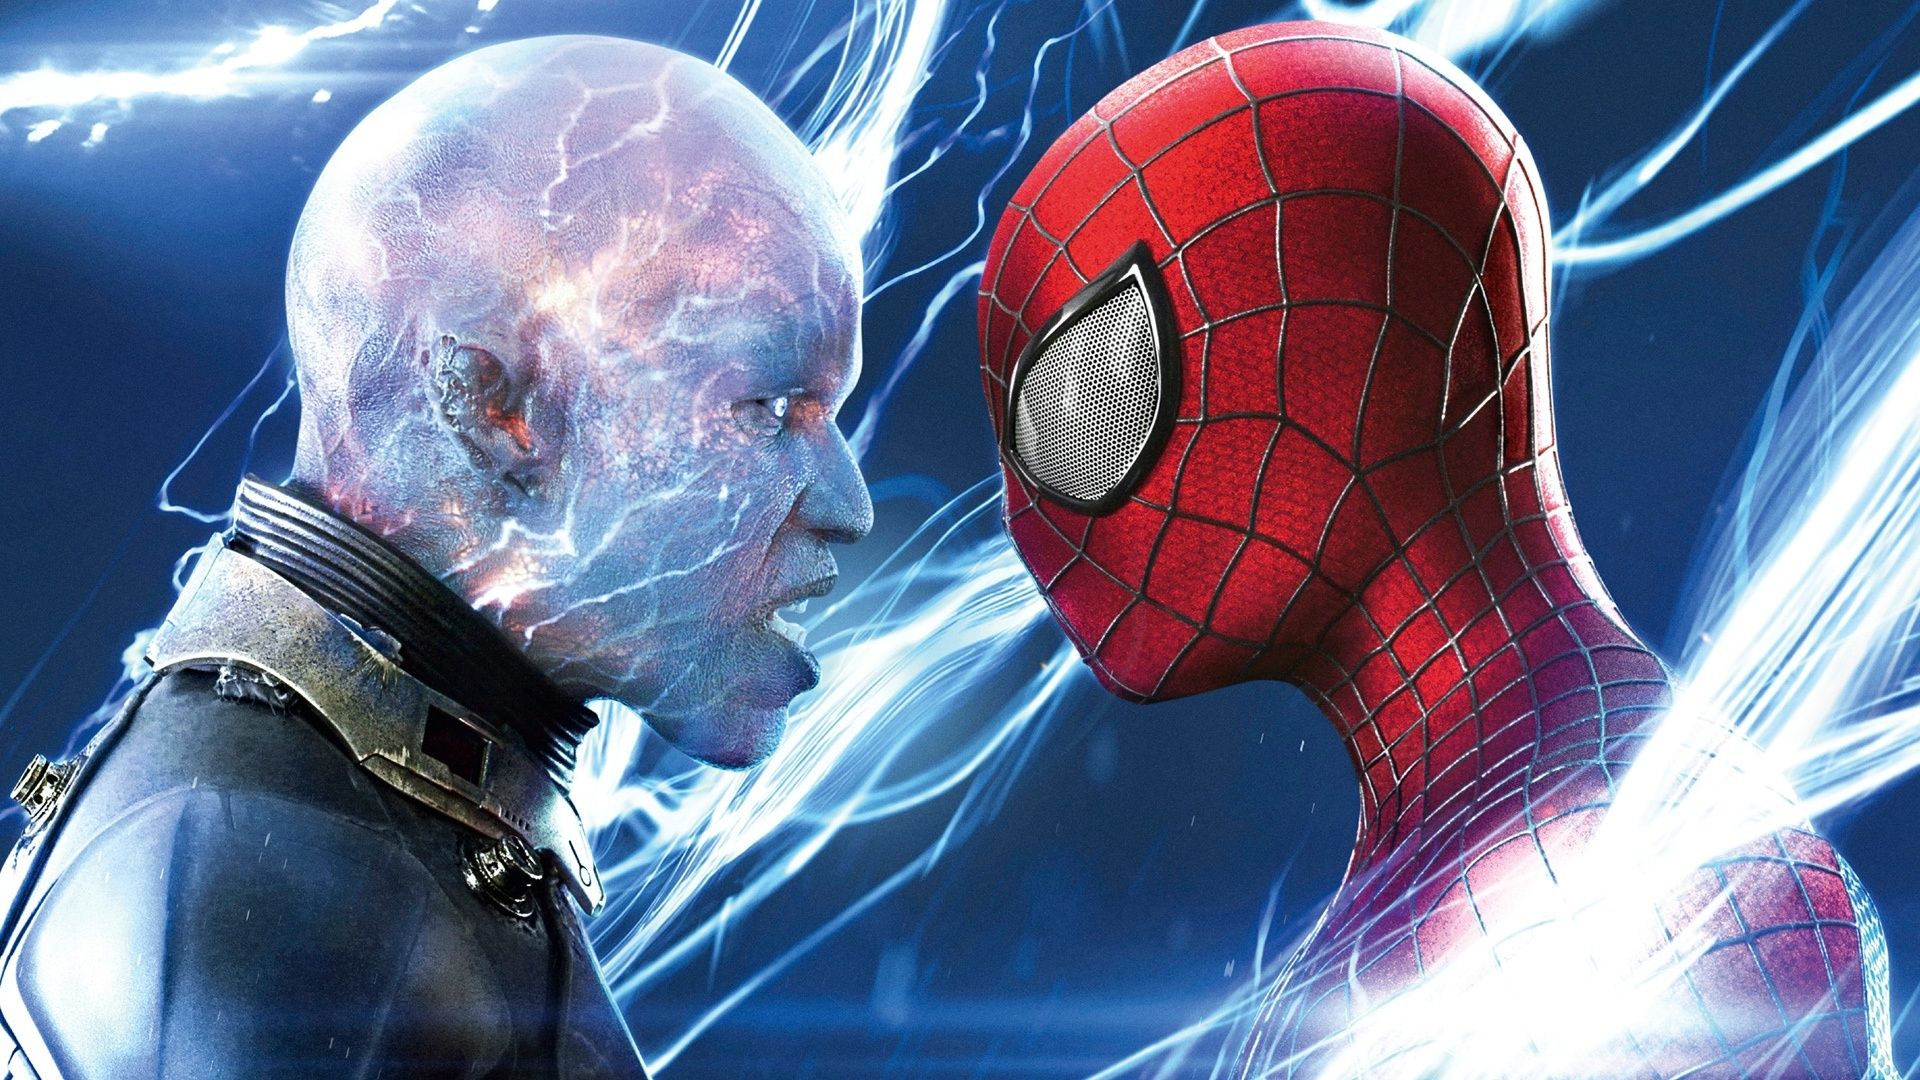 THE AMAZING SPIDER MAN 2 HAS EARNED OVER $132 MILLION OVERSEAS SO FAR. Cinescape Box Office